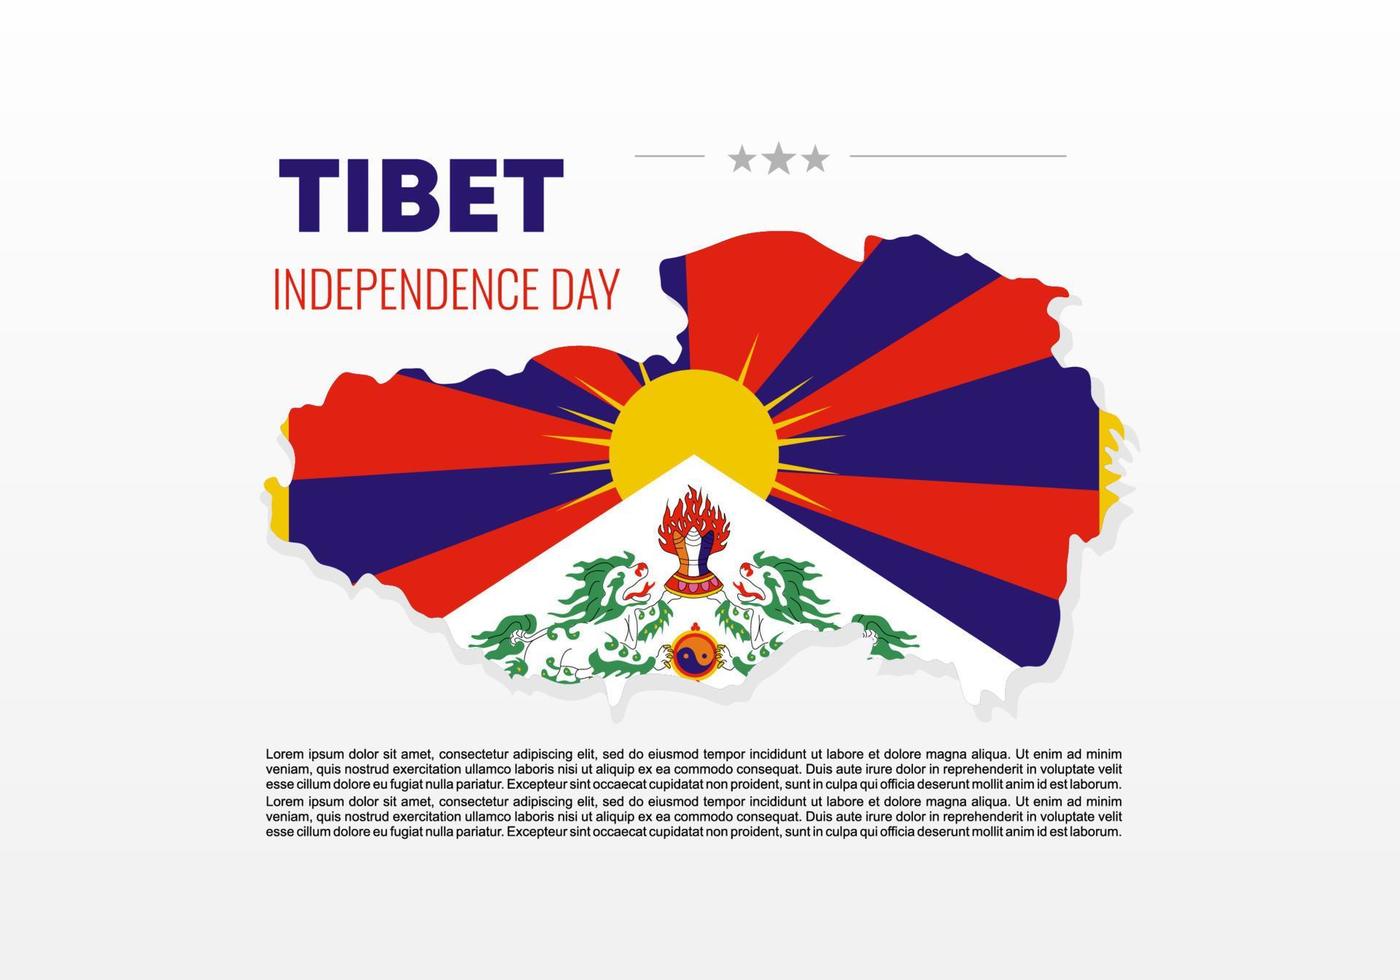 Tibet independence day background on February 13 th. vector